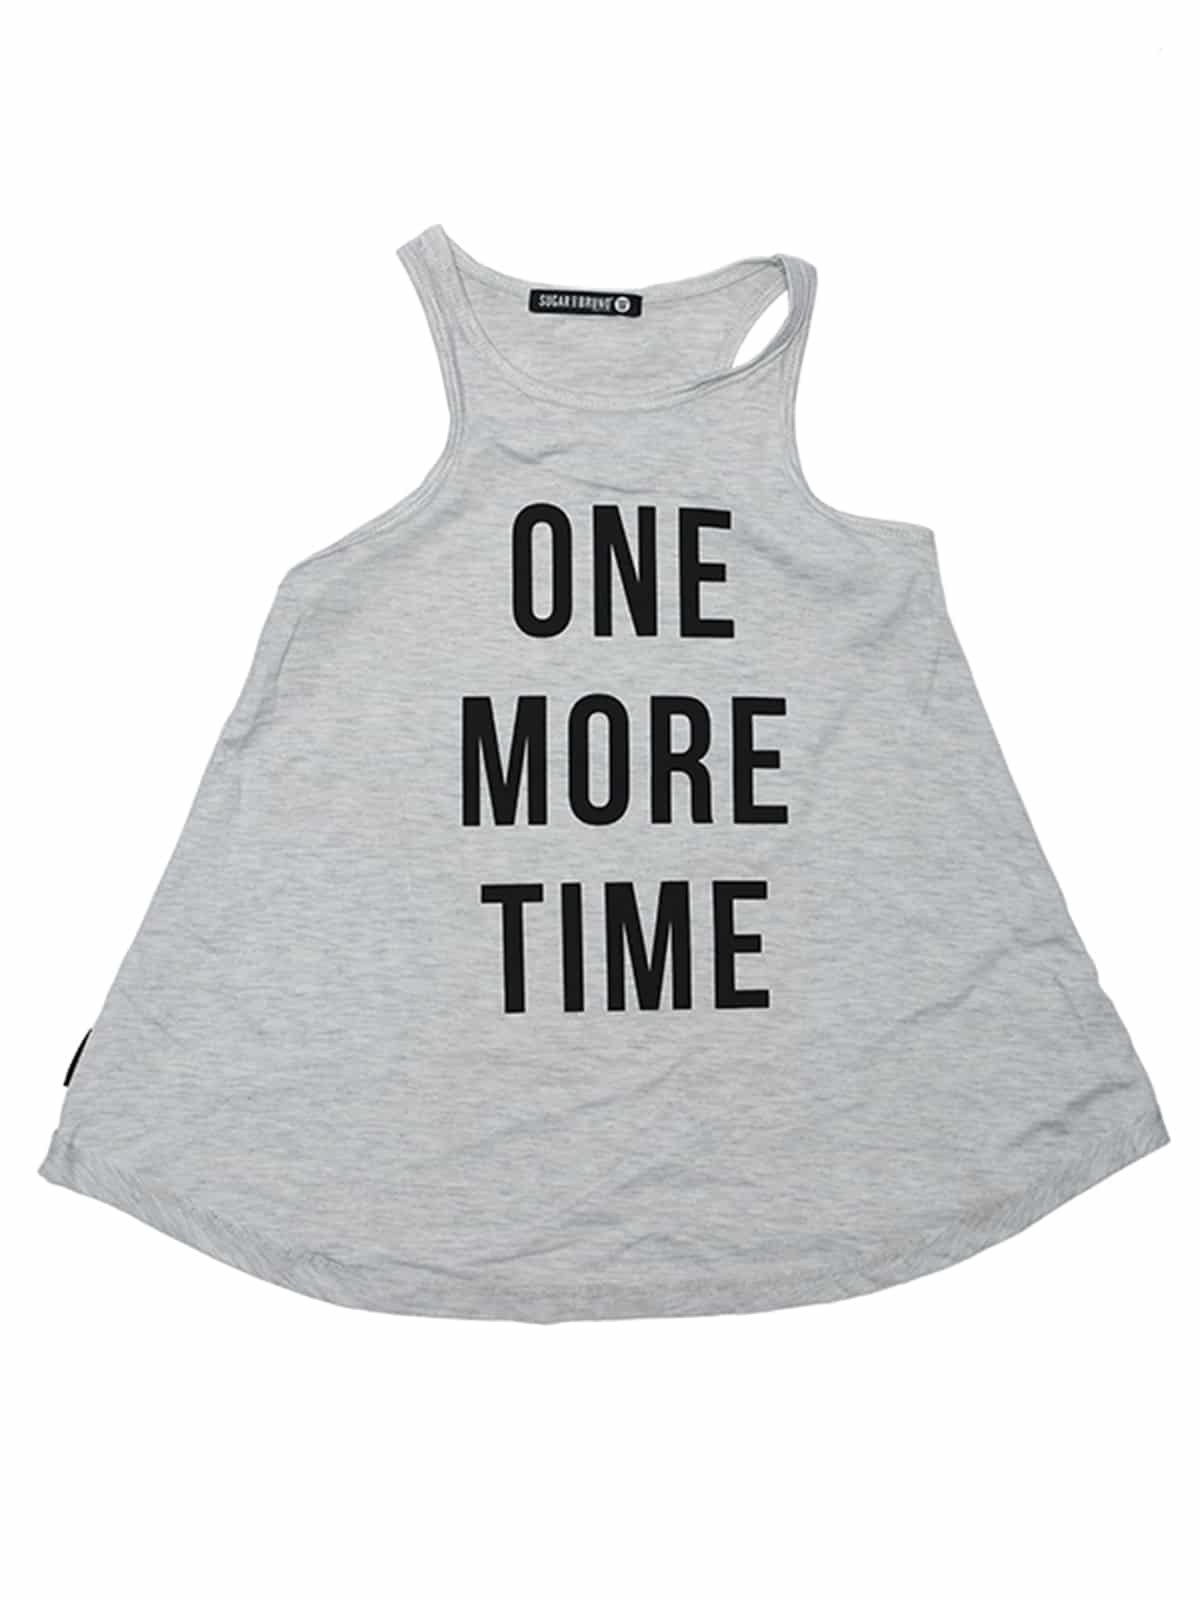 One More Youth Everyday Tank